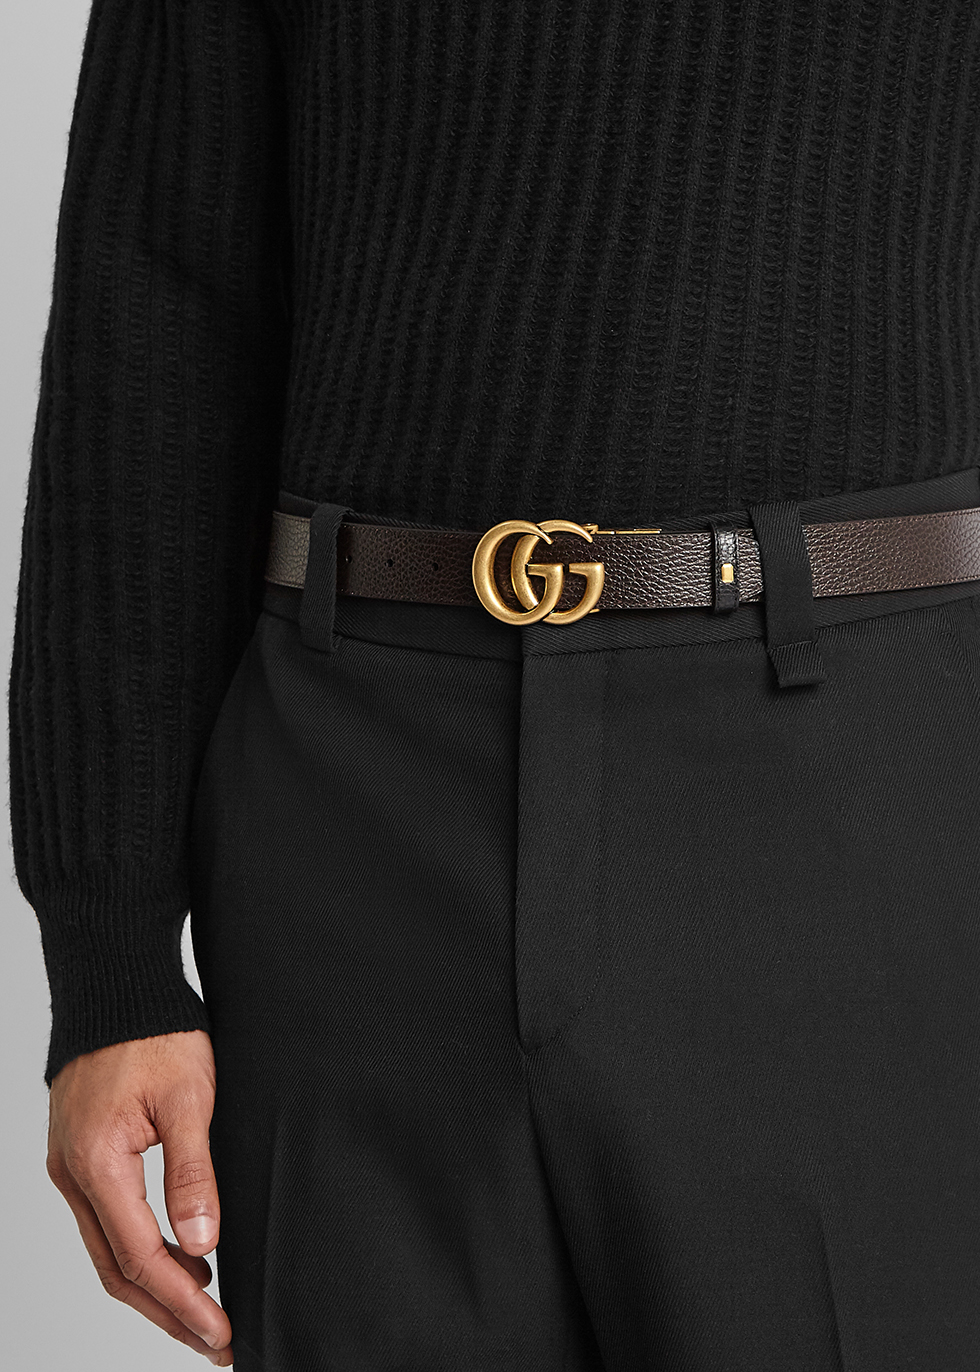 Gucci GG Marmont reversible leather 